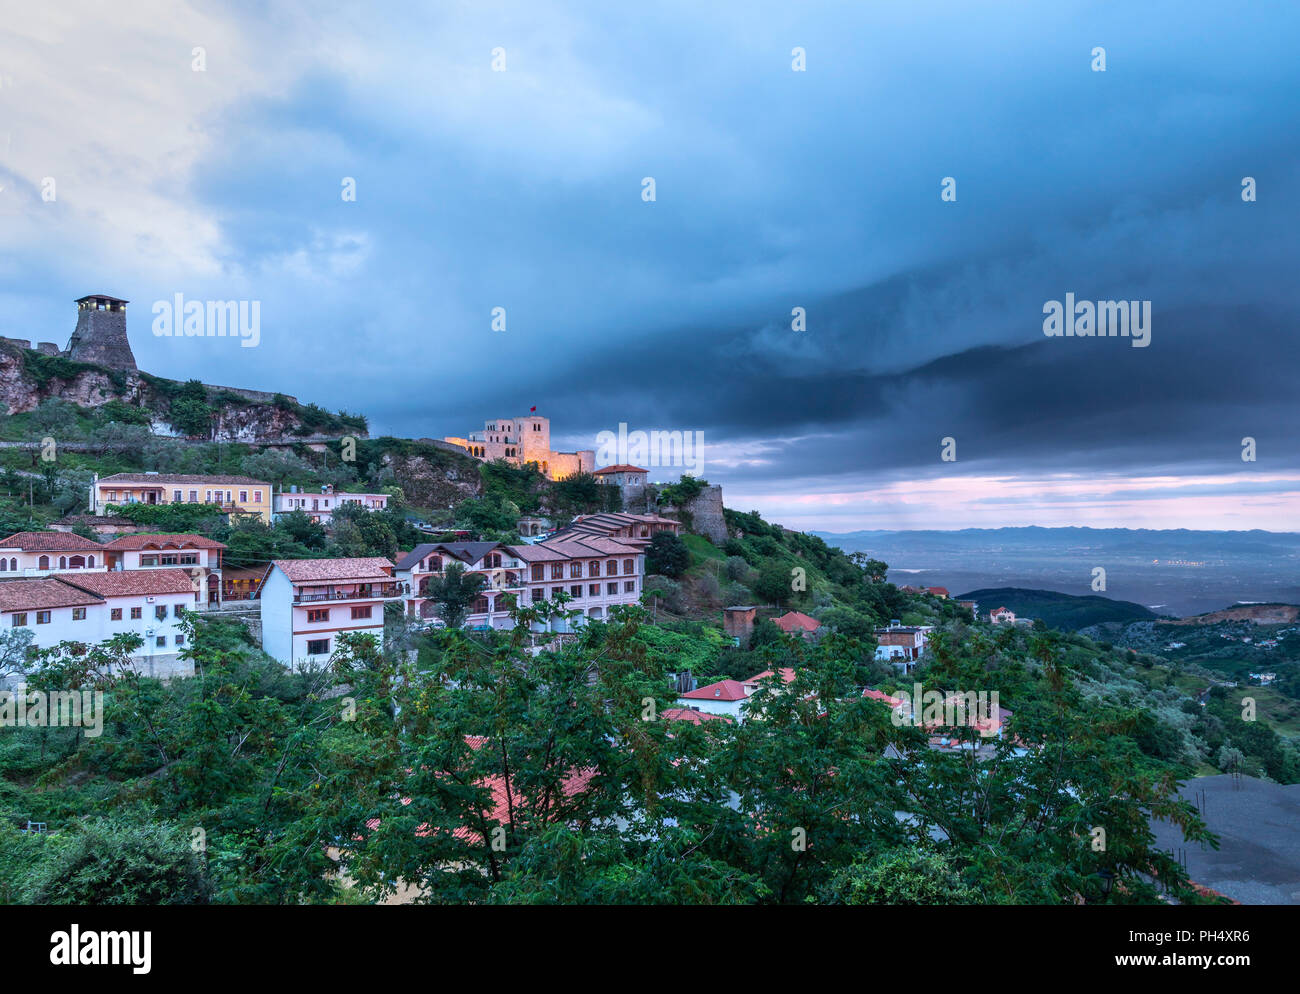 Looking across Kruja, towards the castle, on a stormy evening, central Albania. Stock Photo